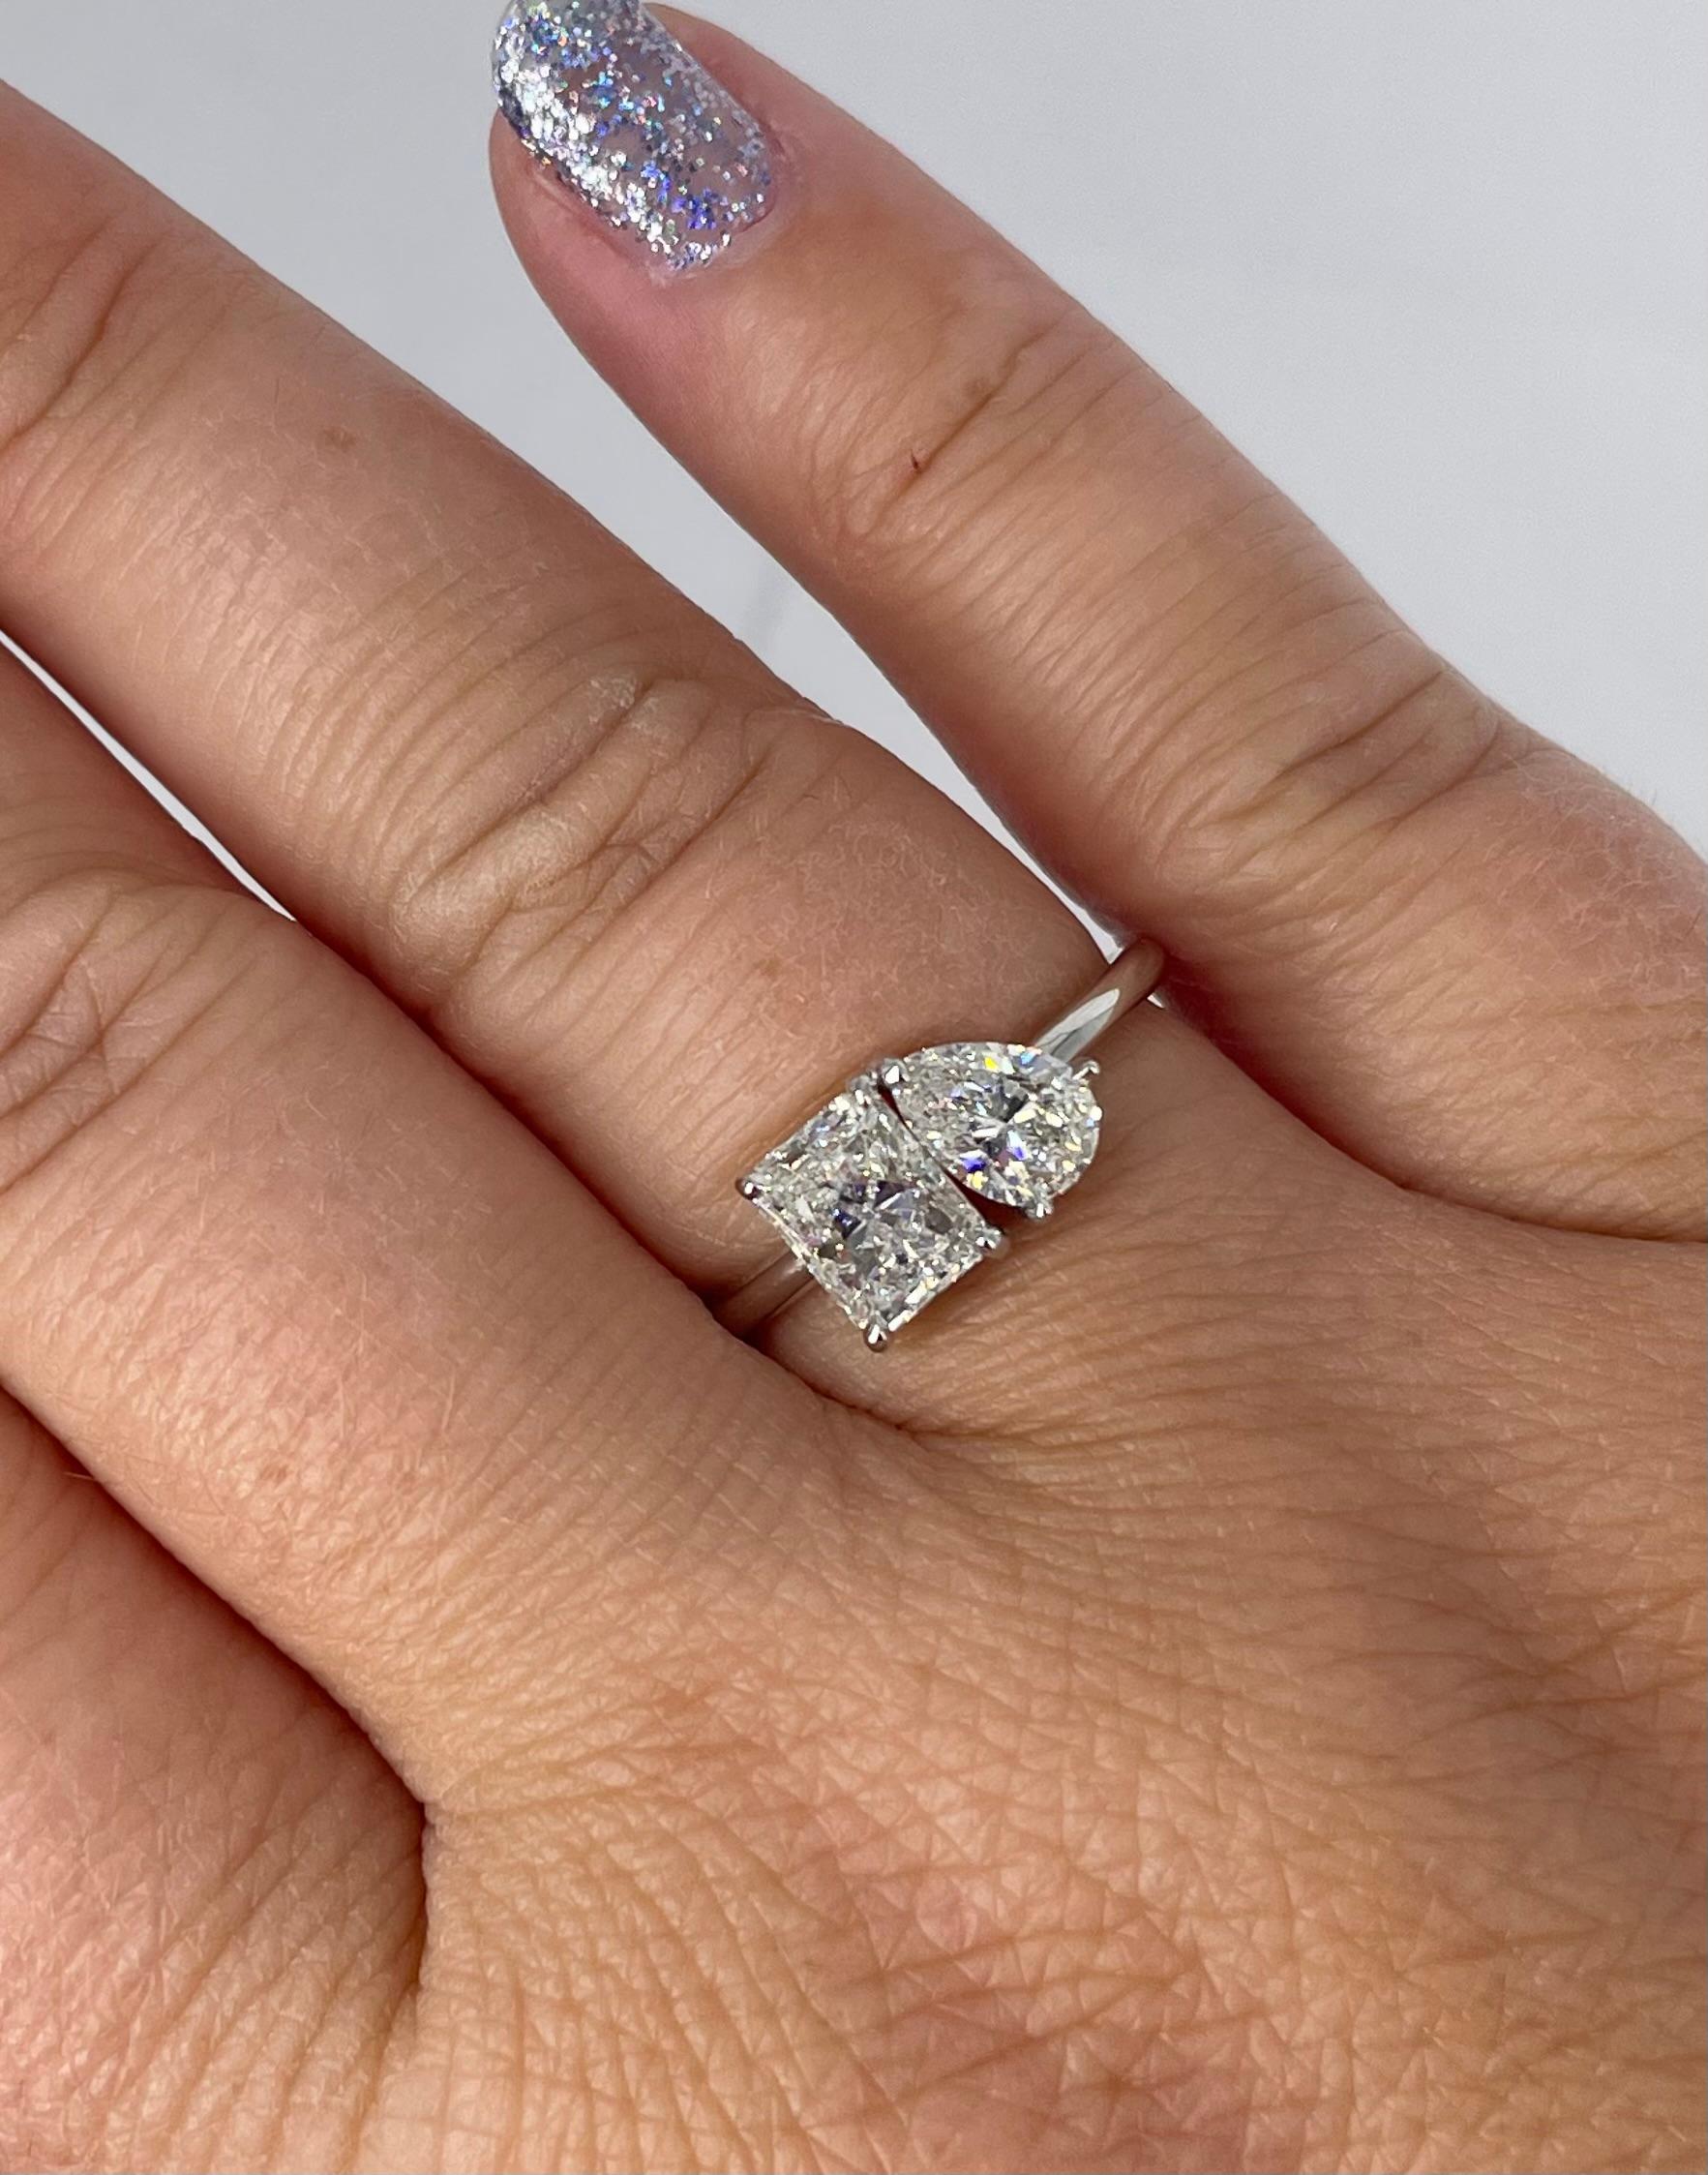 This sweet, sparkly ring is beautiful as a fashion piece or to symbolize you and your loved one. The ring features two diamonds: a 0.51 carat pear diamond, G color and VS1 clarity, and a 0.90 carat GIA certified radiant diamond, I color and I1